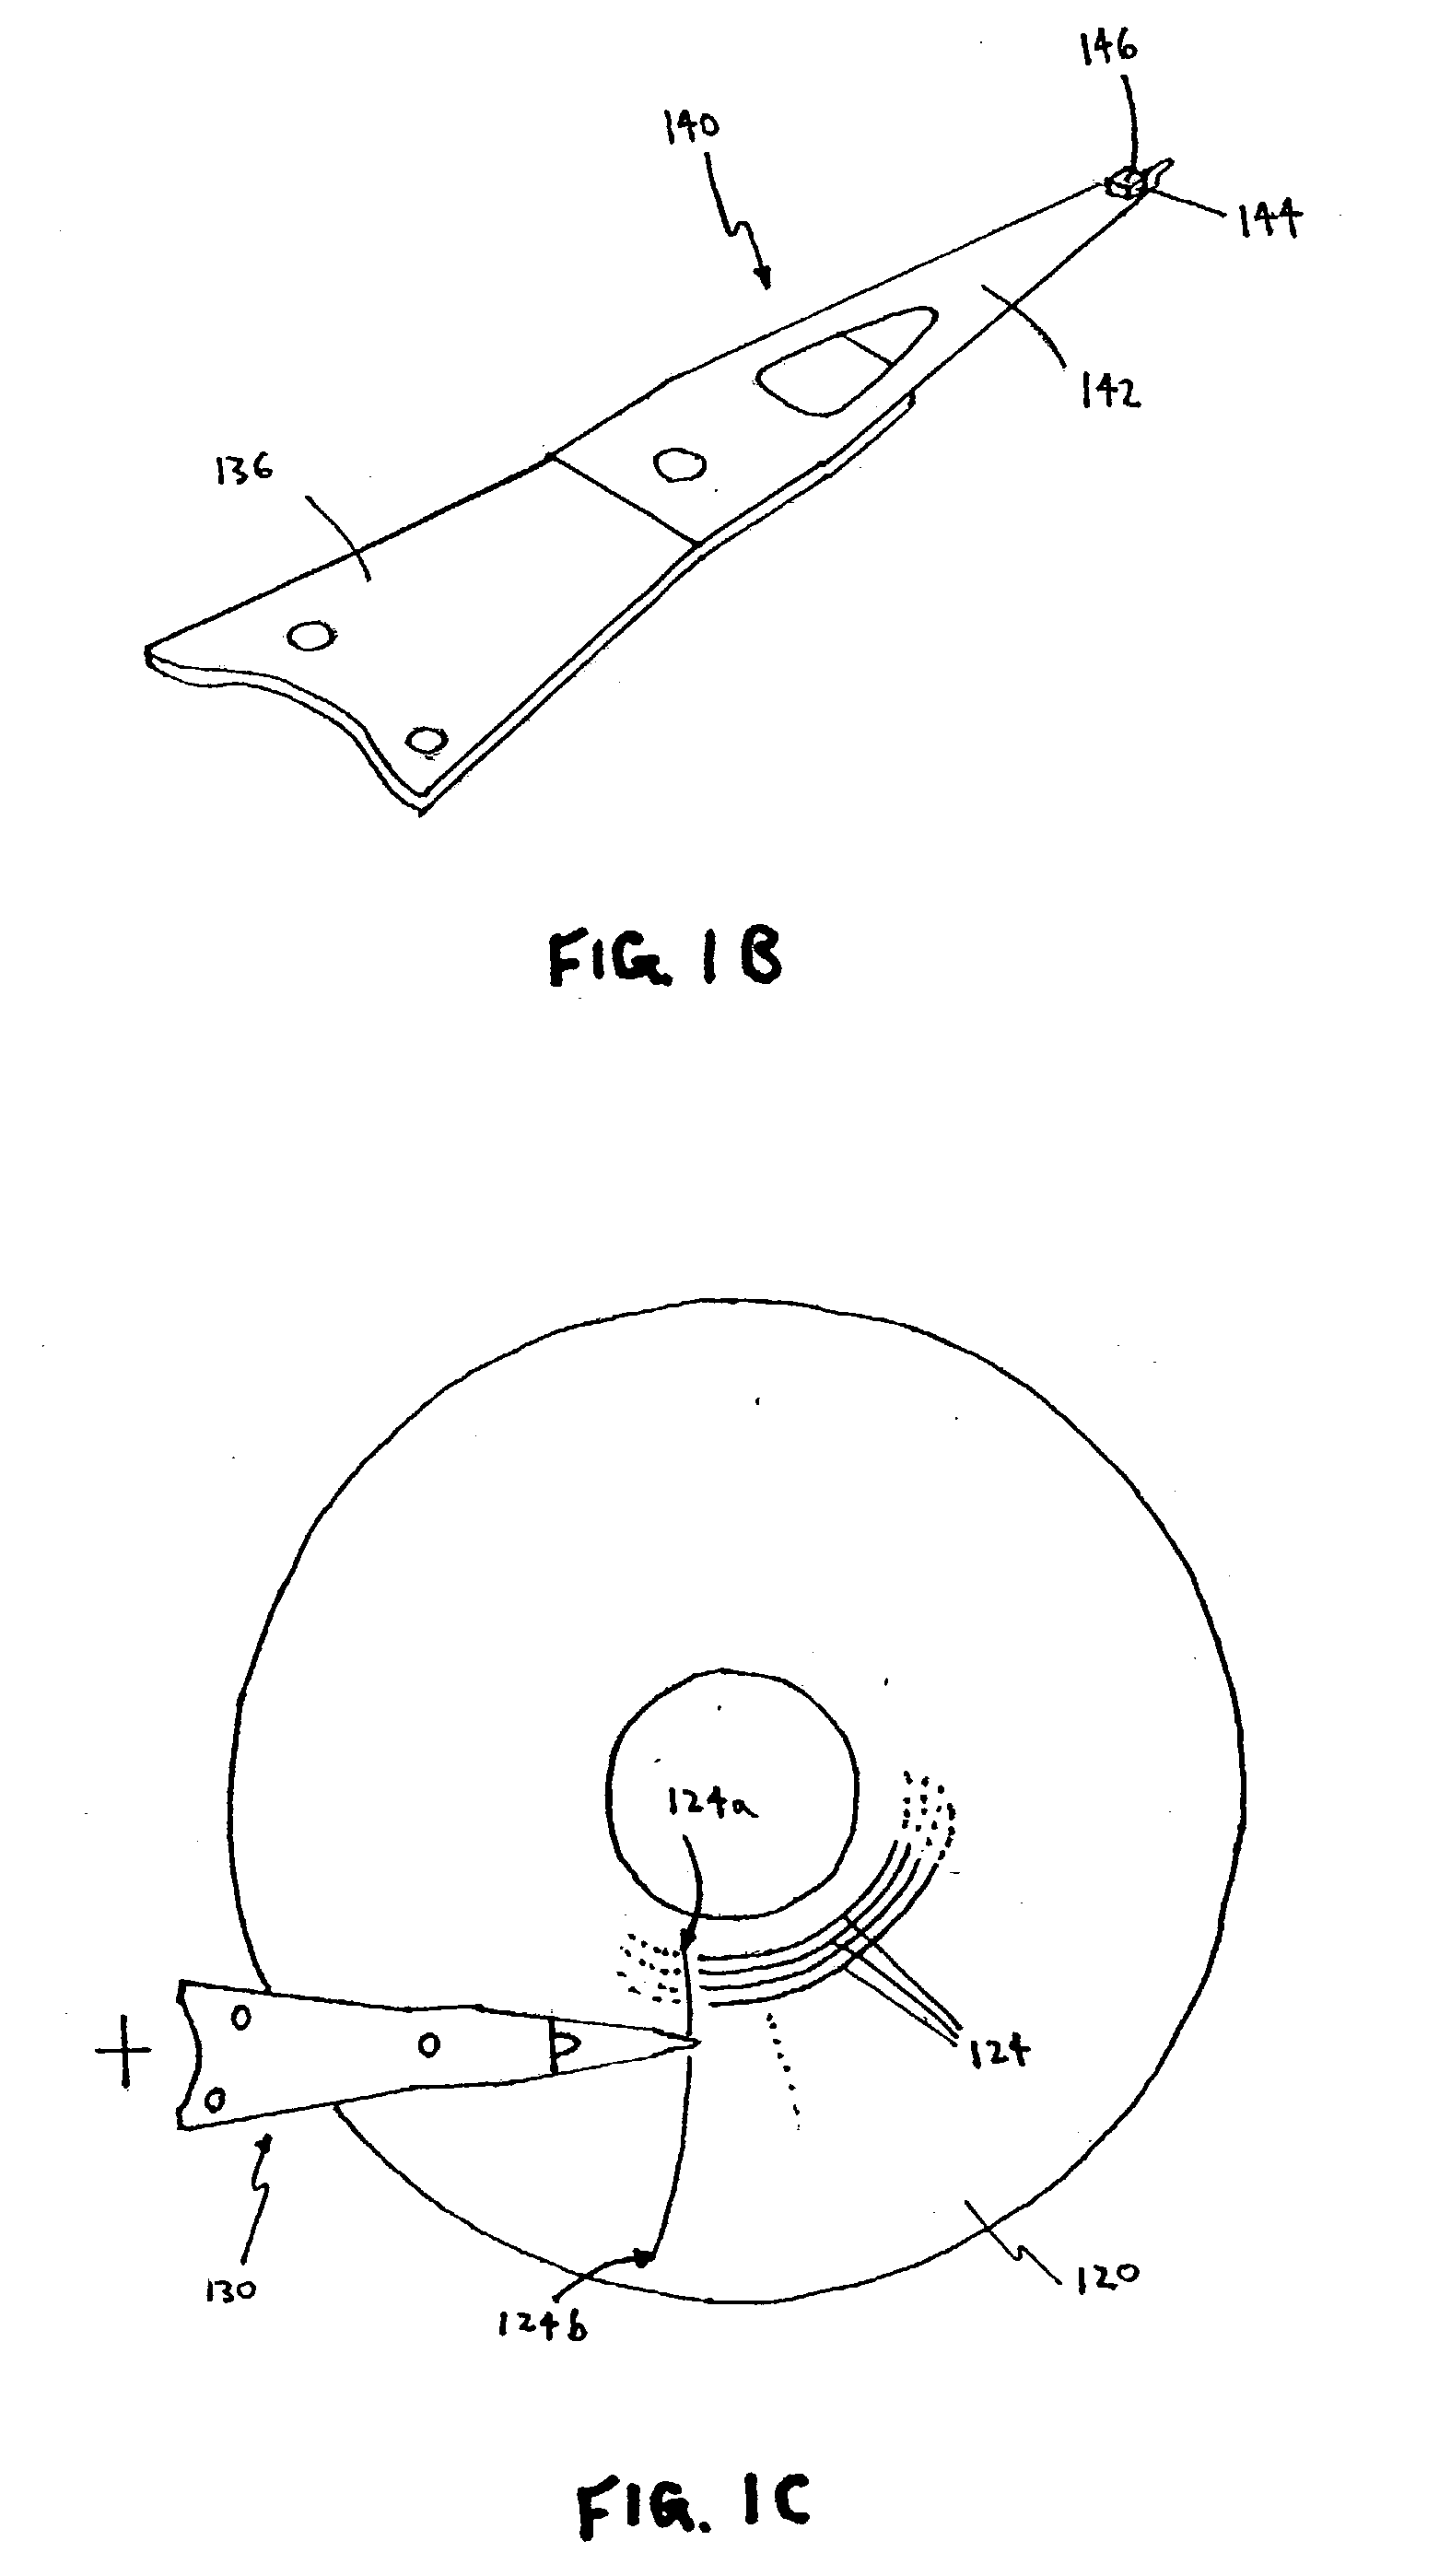 Methods for assembling or reworking a rotary actuator assembly for a media data storage device